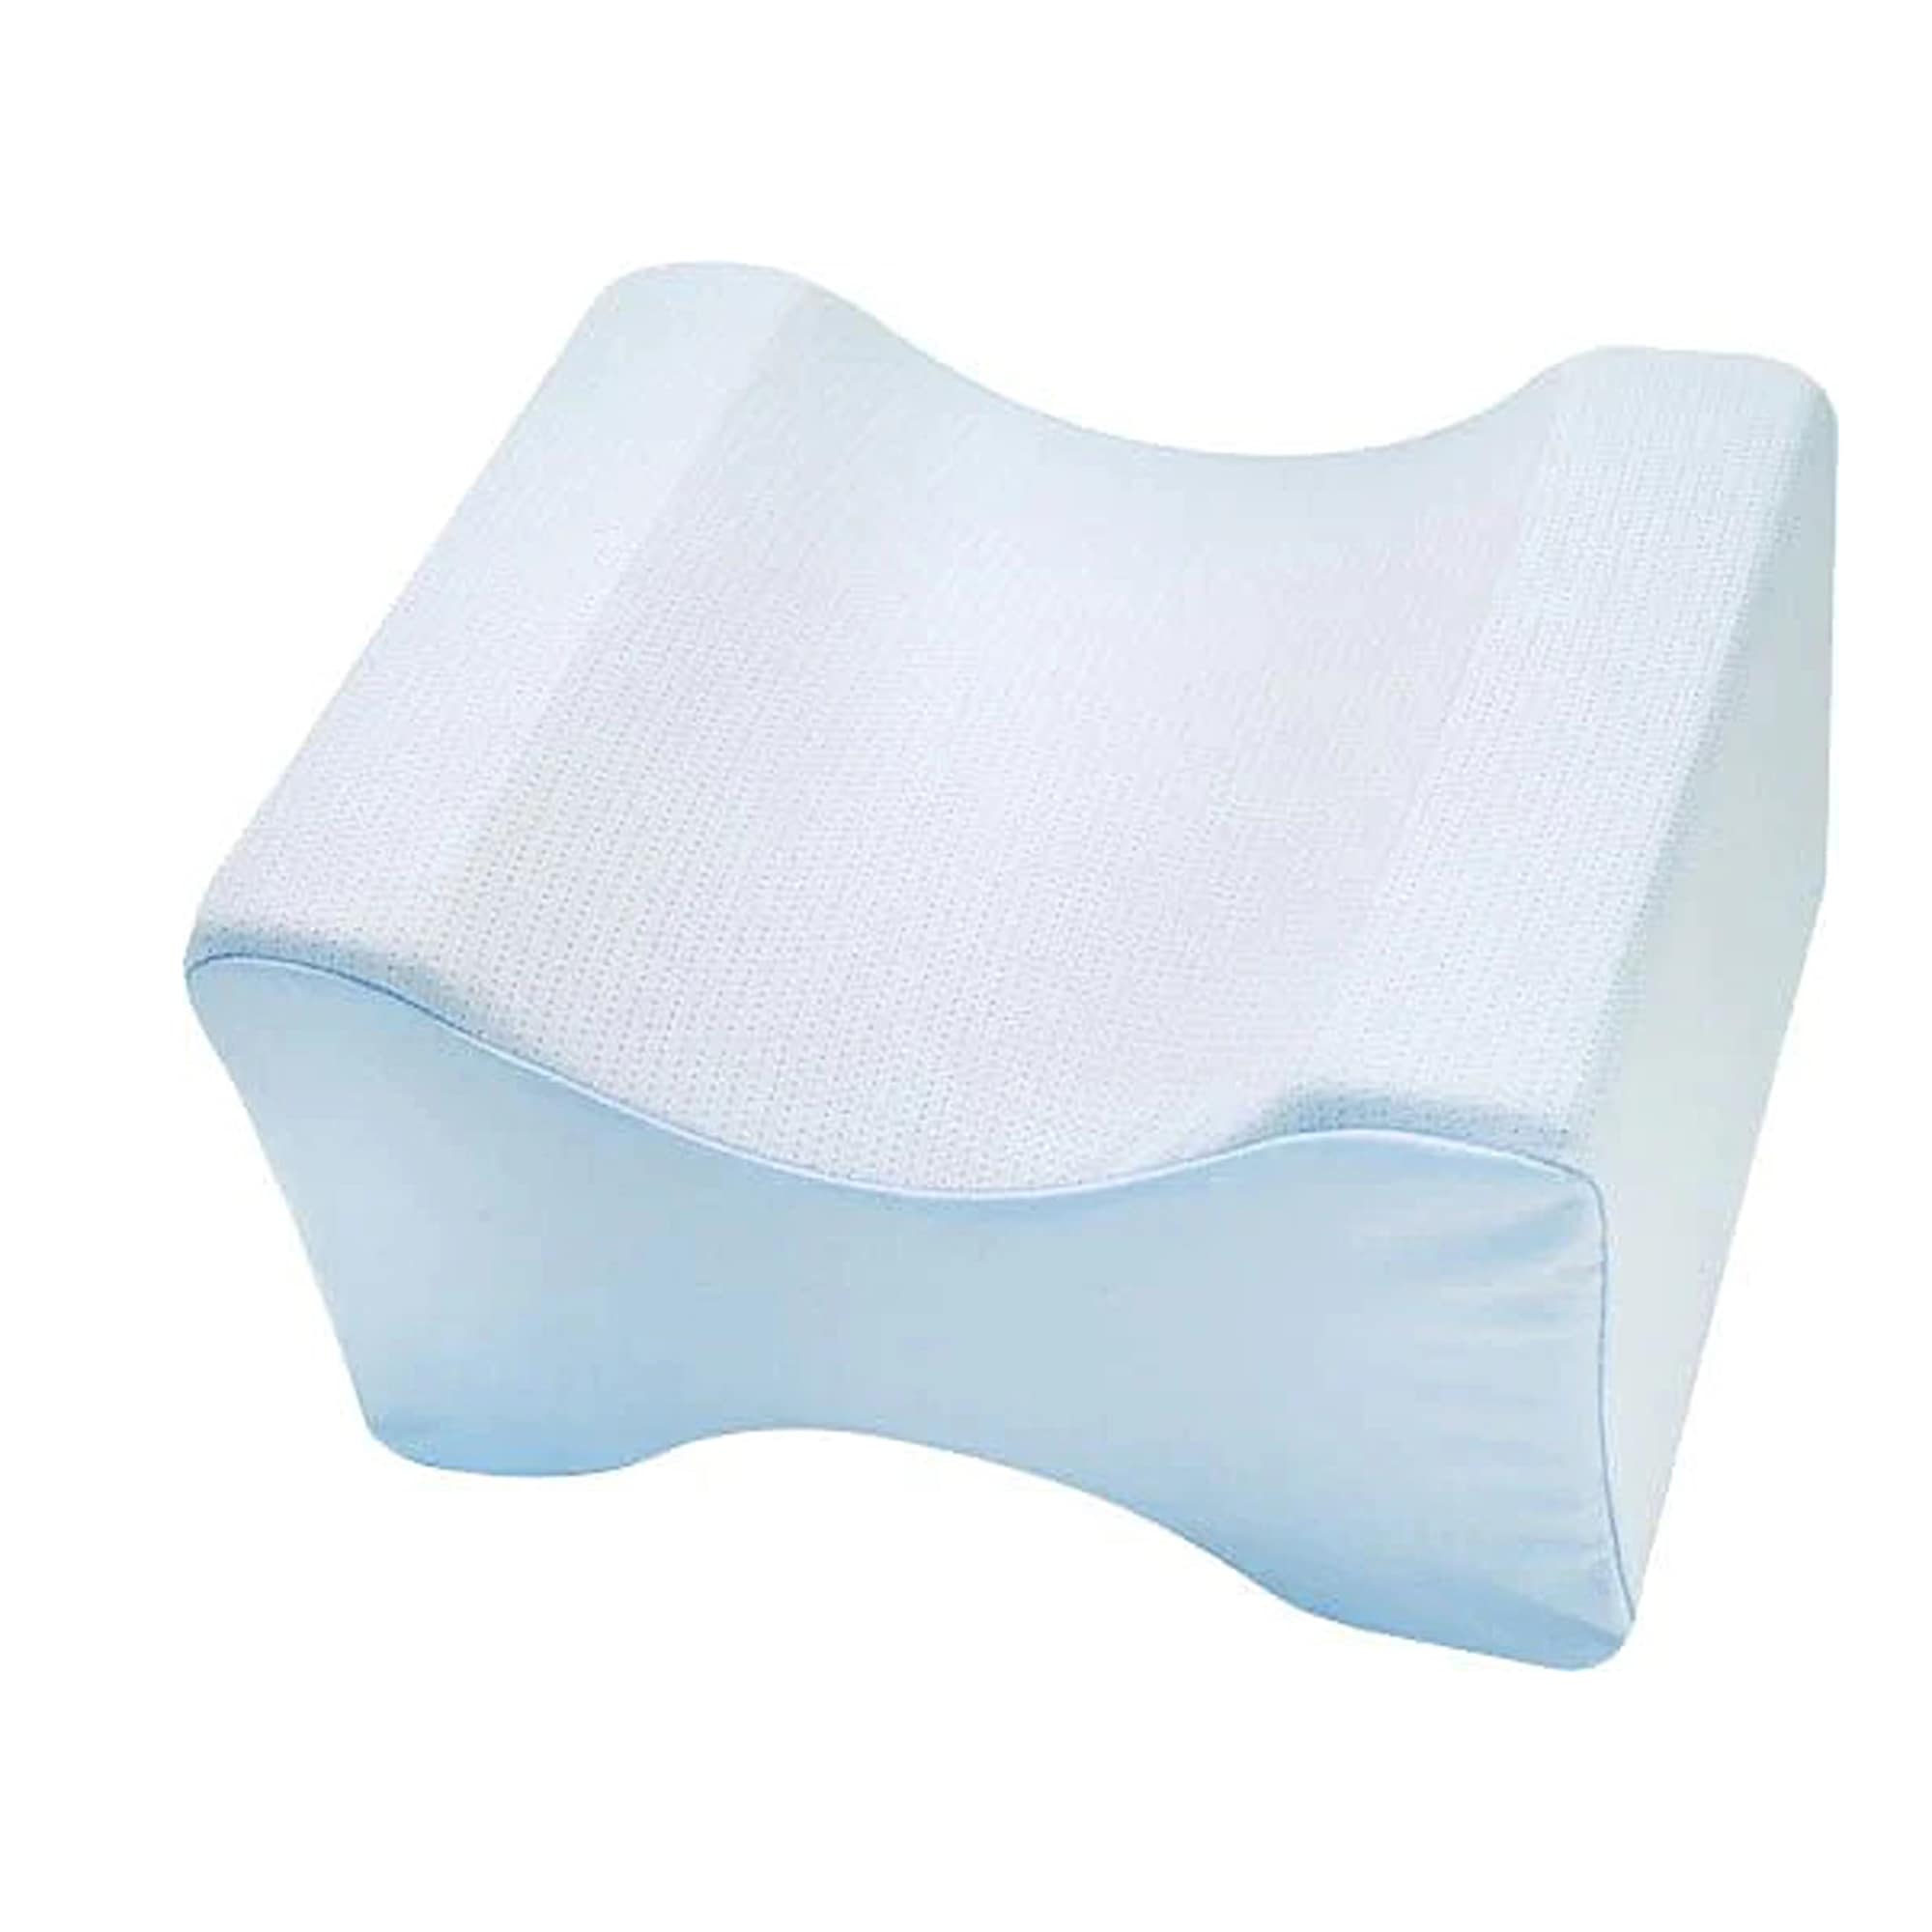 Leg Pillow - Adjusts Your Hips, Legs And Spine For A Comfortable Sleep - On  Sale - Bed Bath & Beyond - 36982972